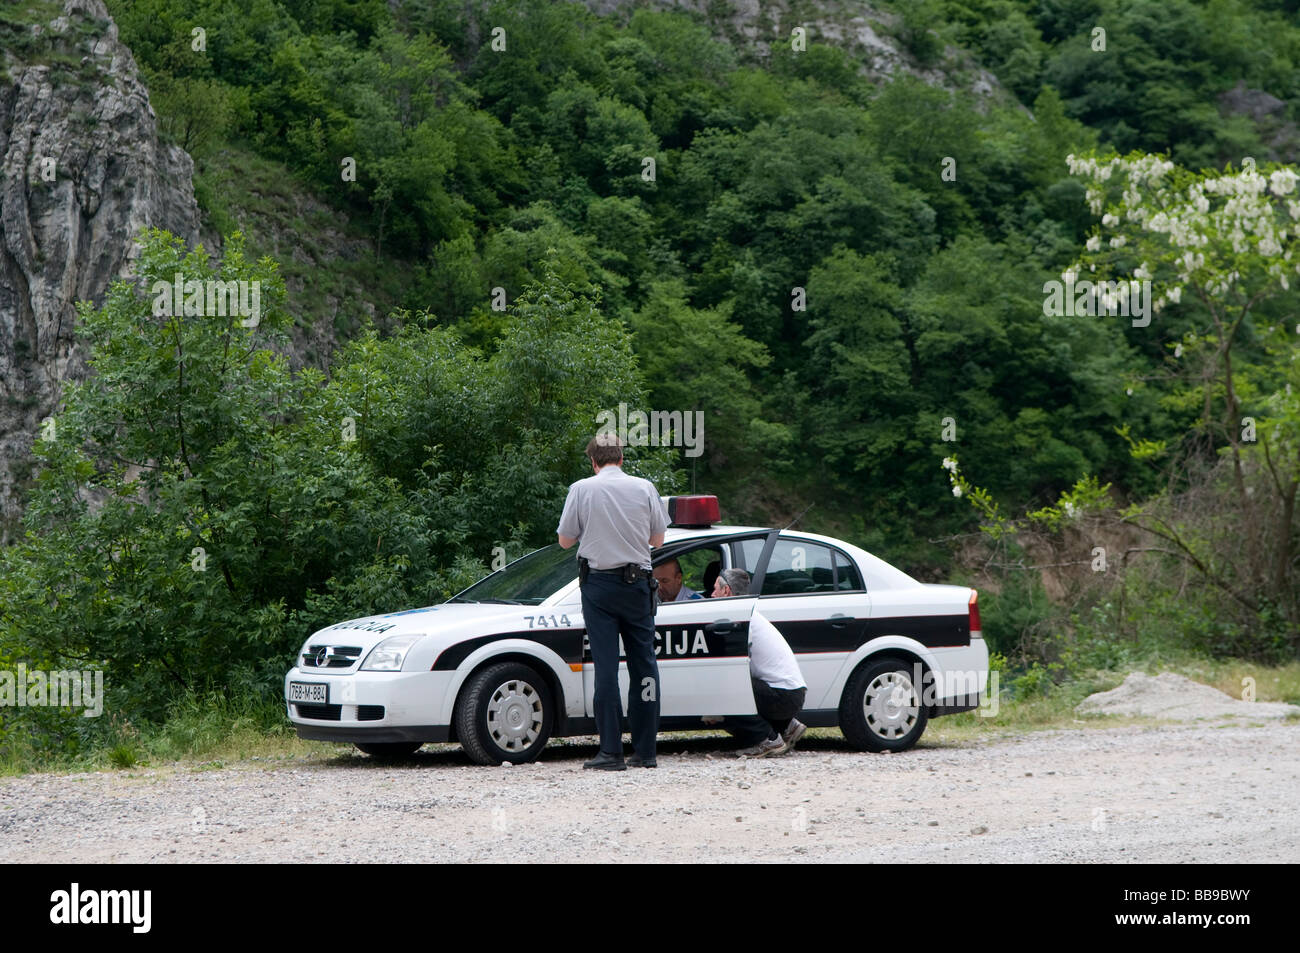 police checking documents of a driver in a police patrol car in Bosnia Herzegovina Stock Photo